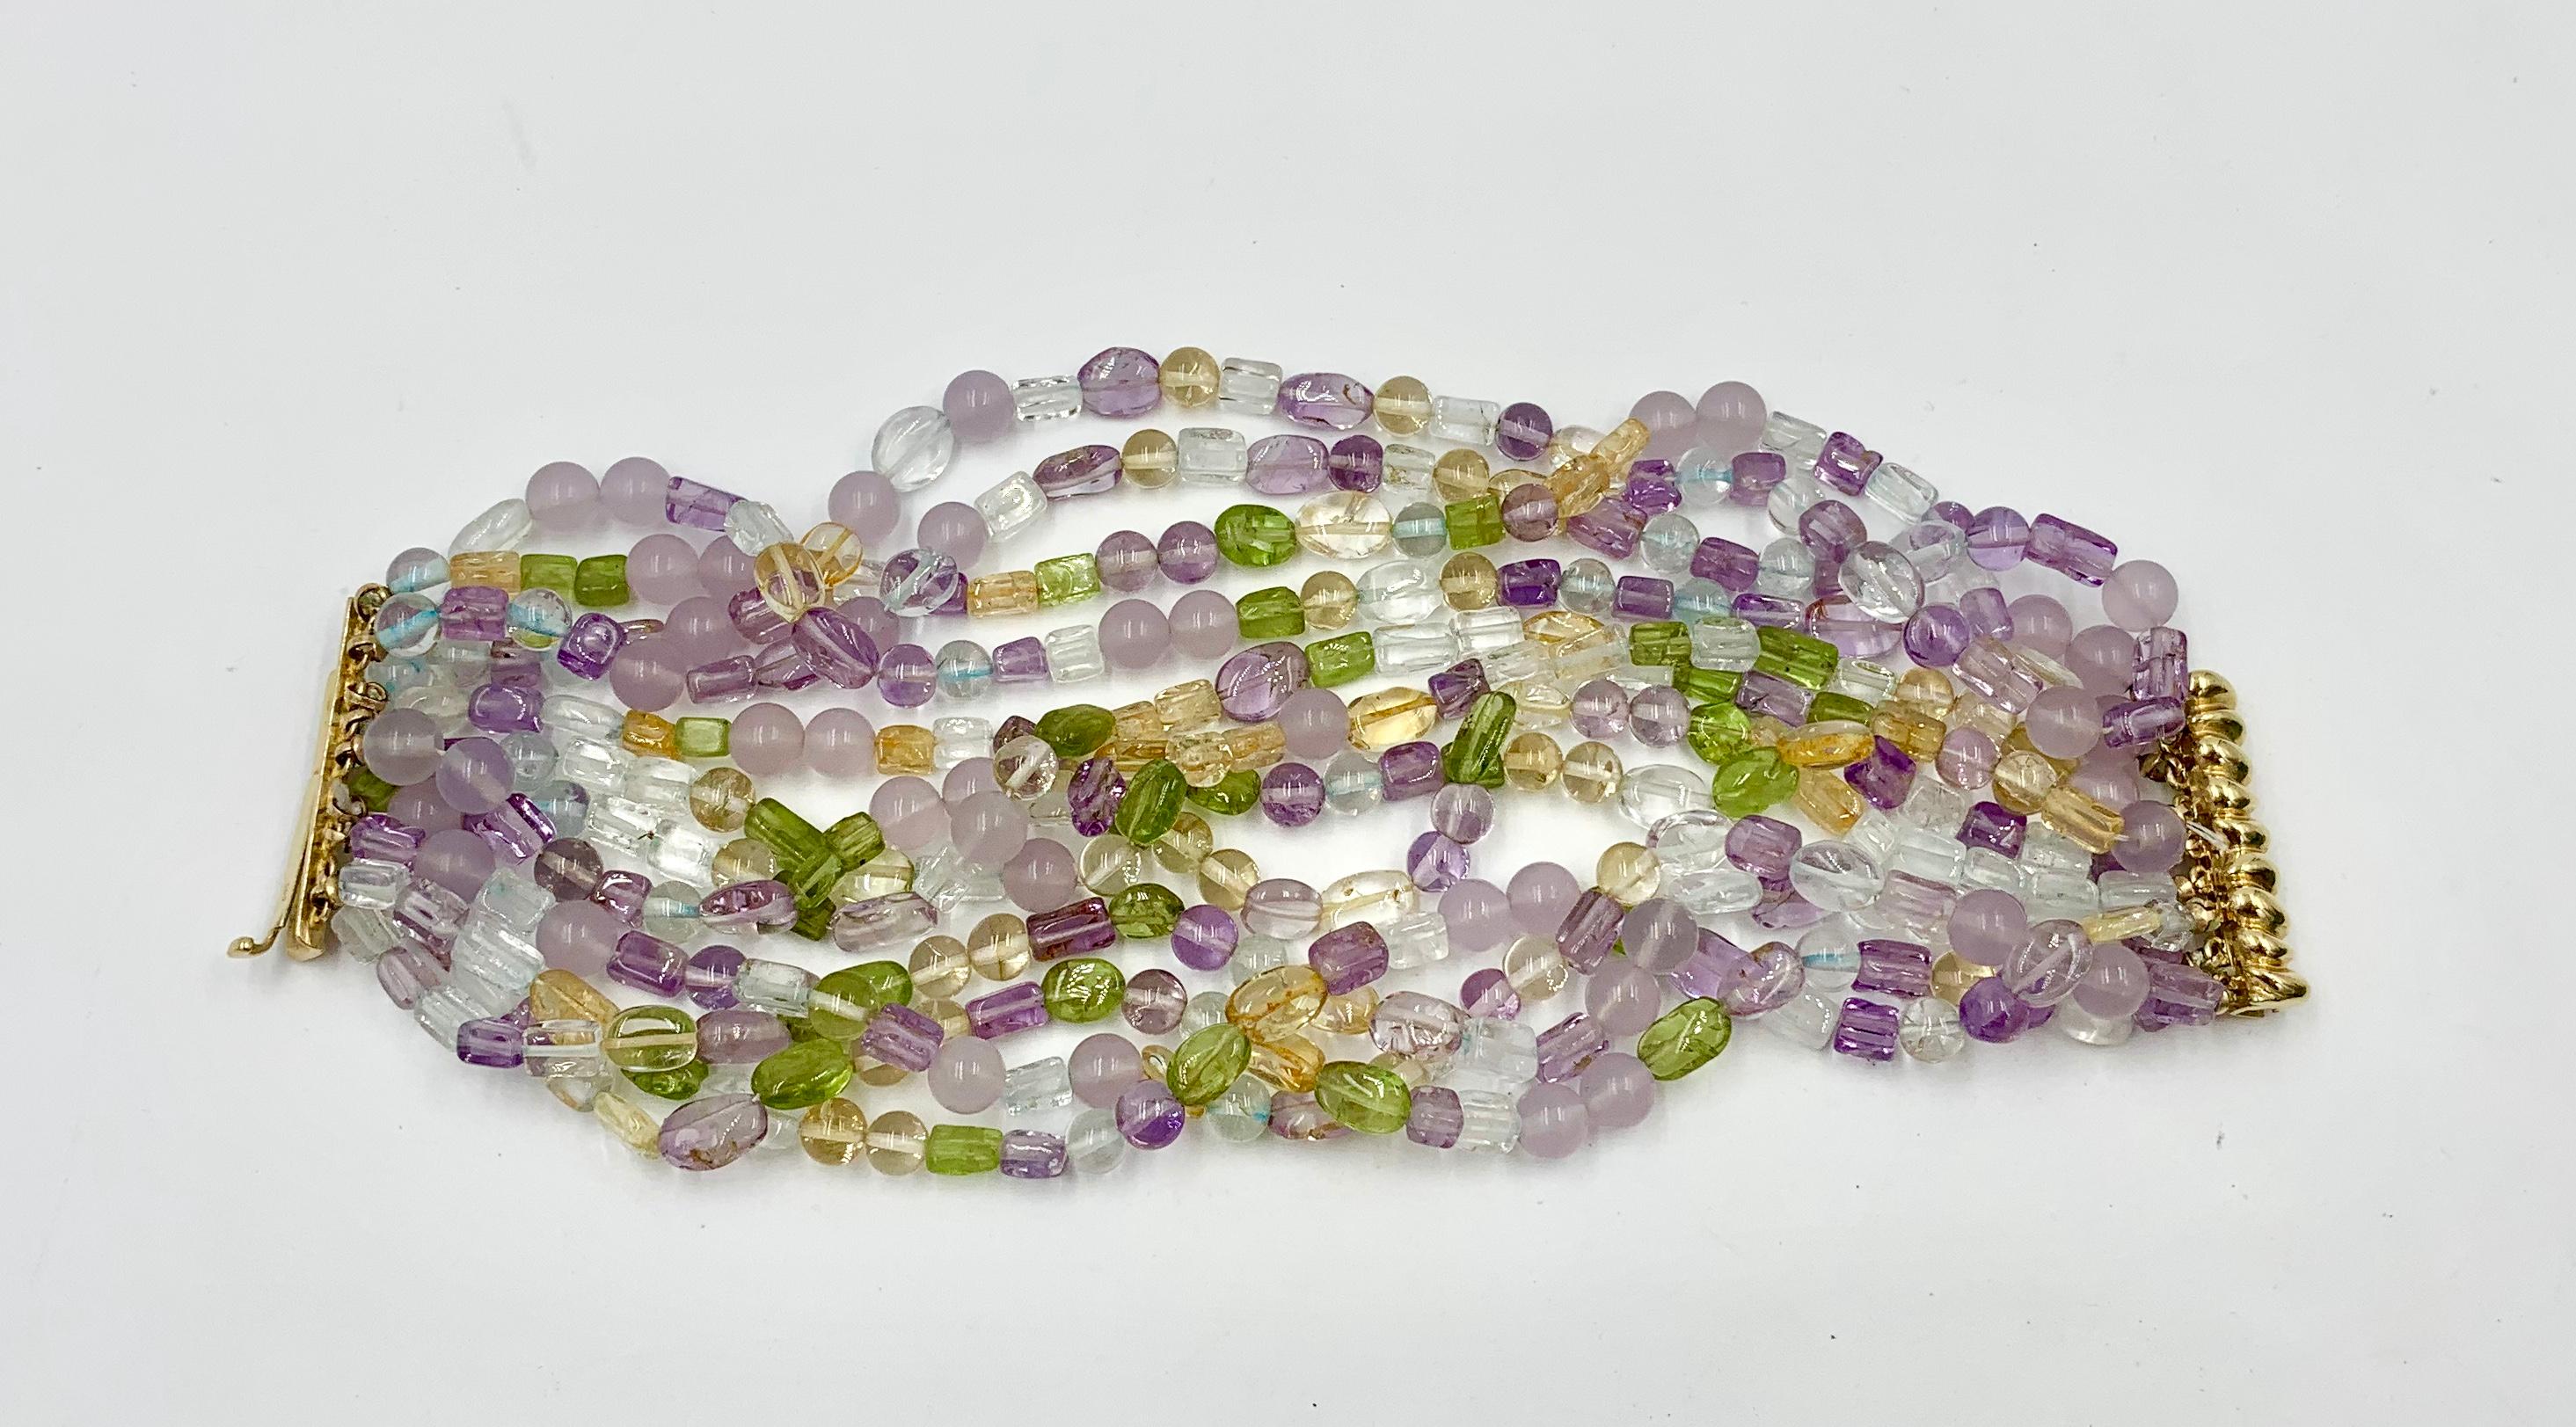 This is a Multistrand Multicolored Bead Torsade Bracelet with 12 strands of Amethyst, Peridot, Citrine & Aquamarine beads with a 14 Karat Gold clasp.  The stunning Multigem Bracelet is set with round, rectangular and oval Aquamarine, Citrine,